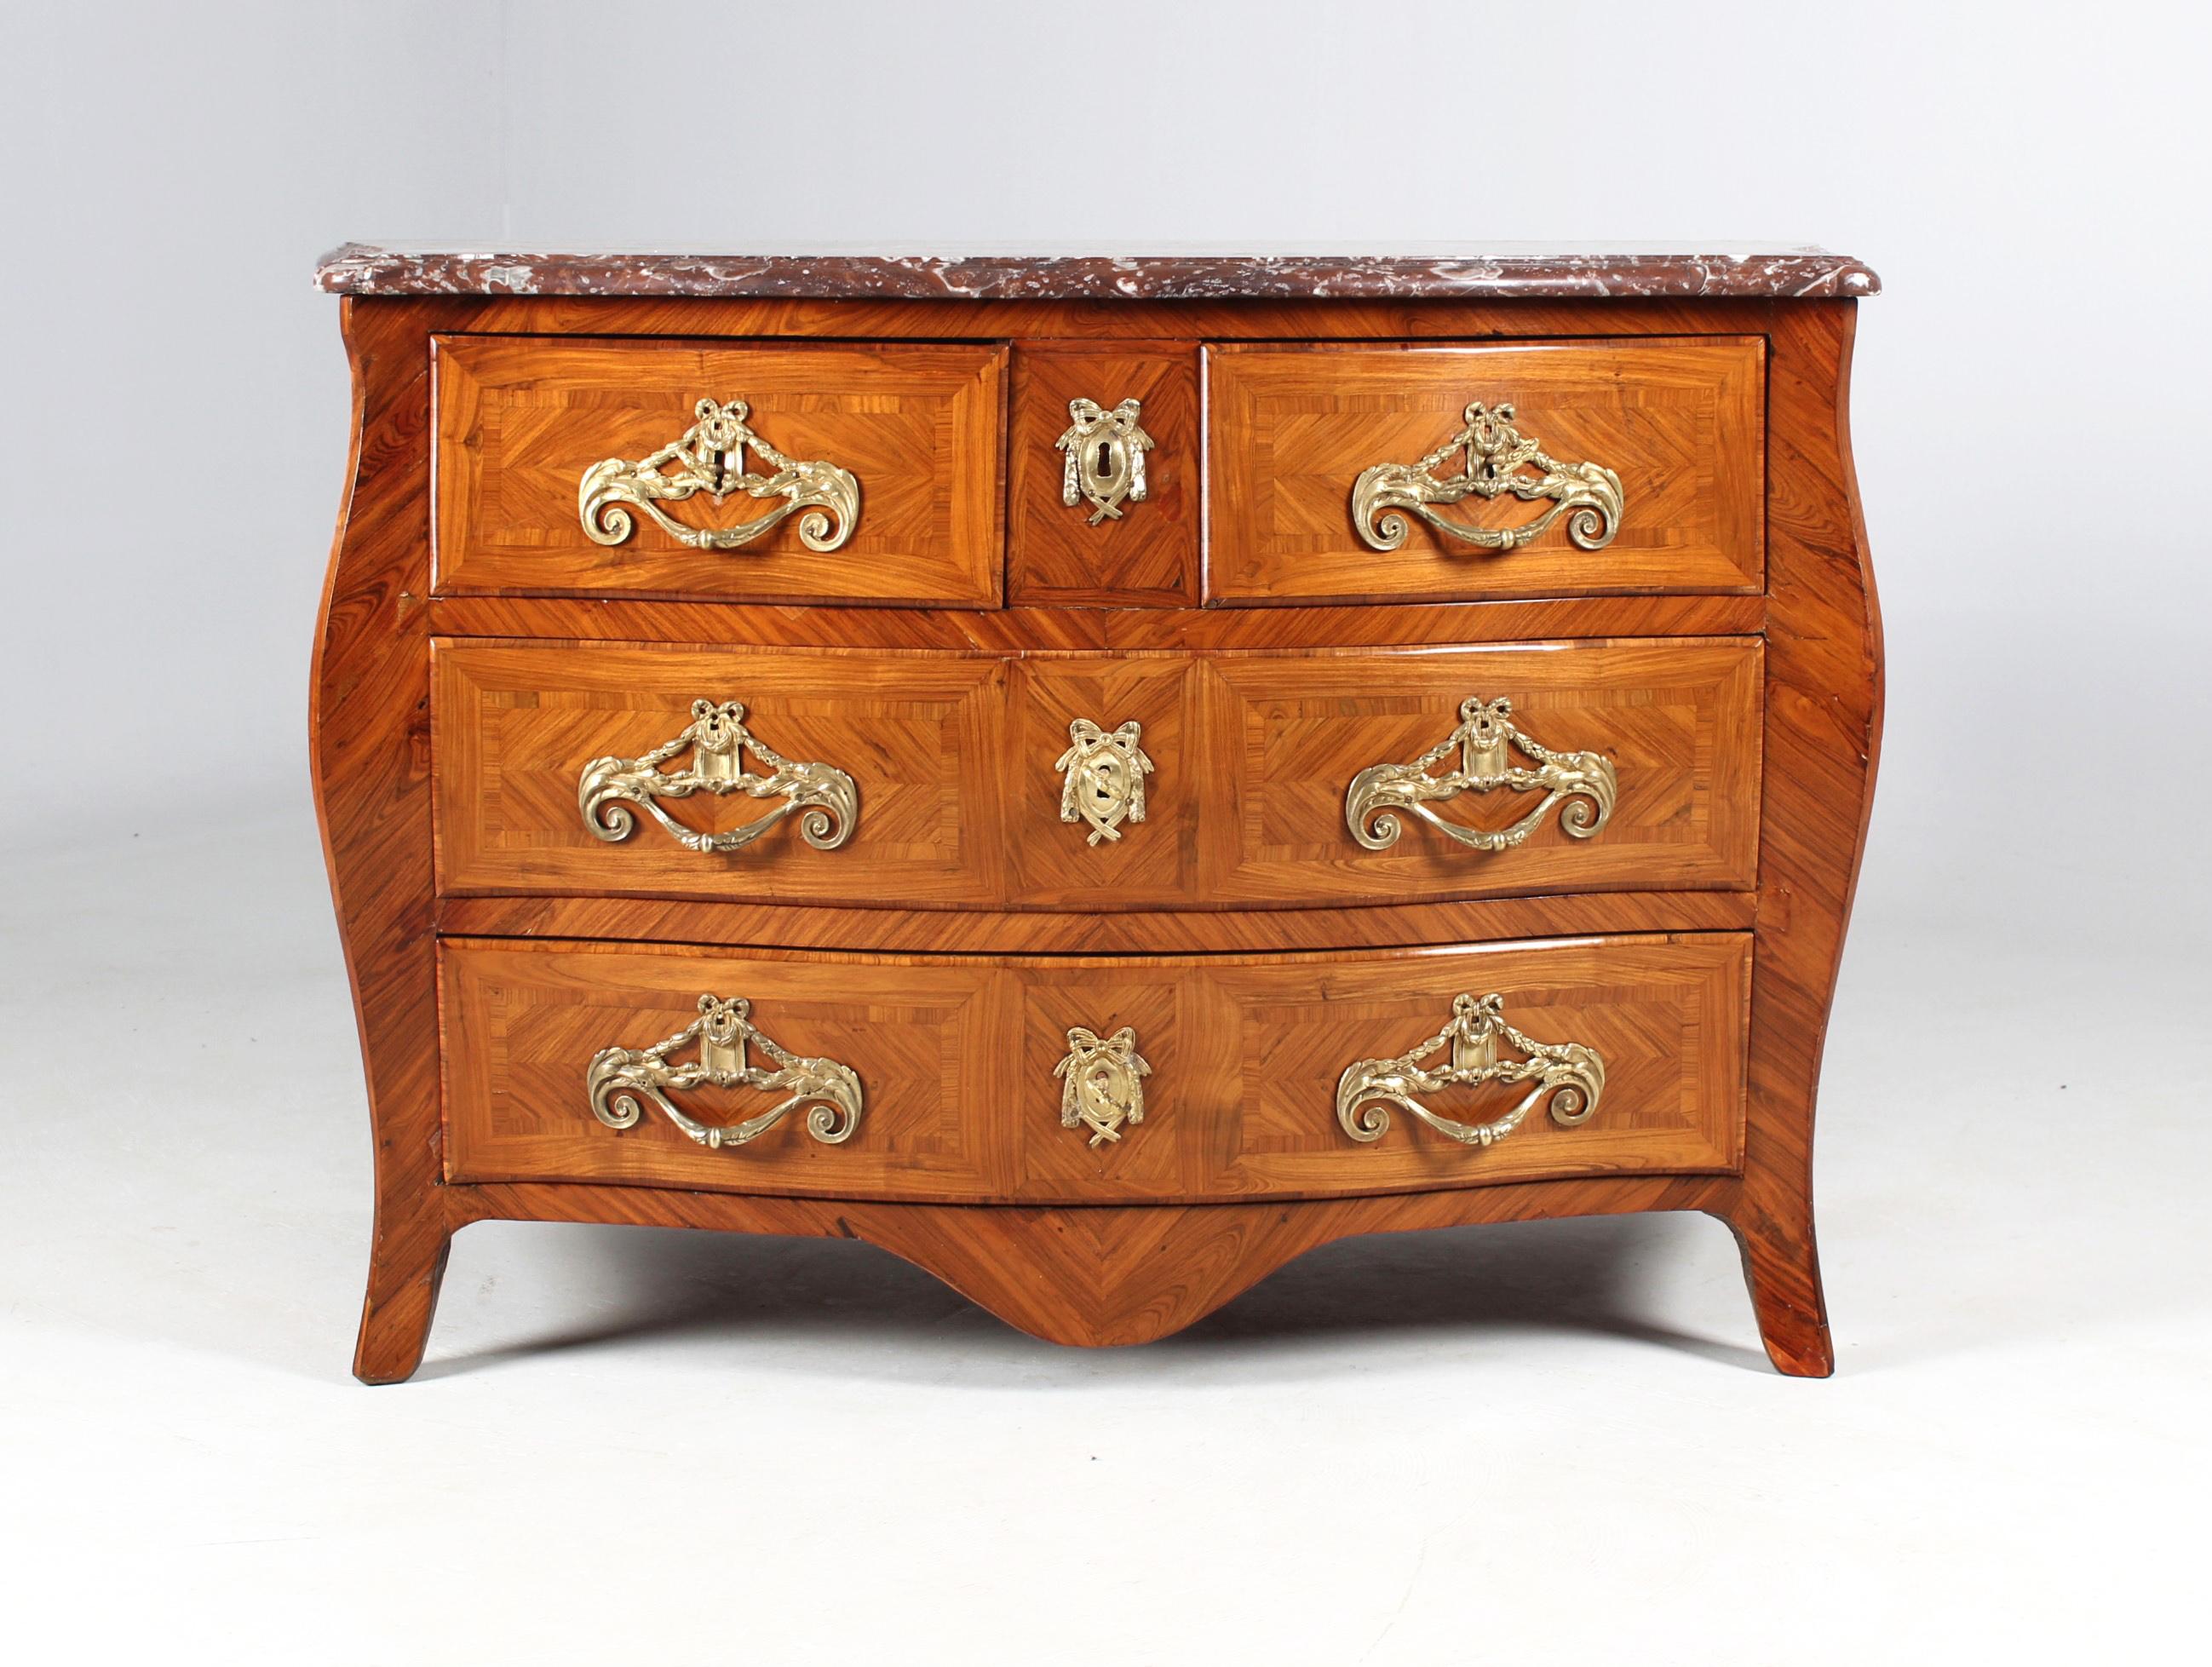 fine Louis XV chest of drawers from the 18th century.

France
Middle 18th century

Dimensions: h x w x d: 82 x 124 x 62 cm (measured at the top)

Description:
Excellent Louis XV chest of drawers cambered on three sides.

At the front we